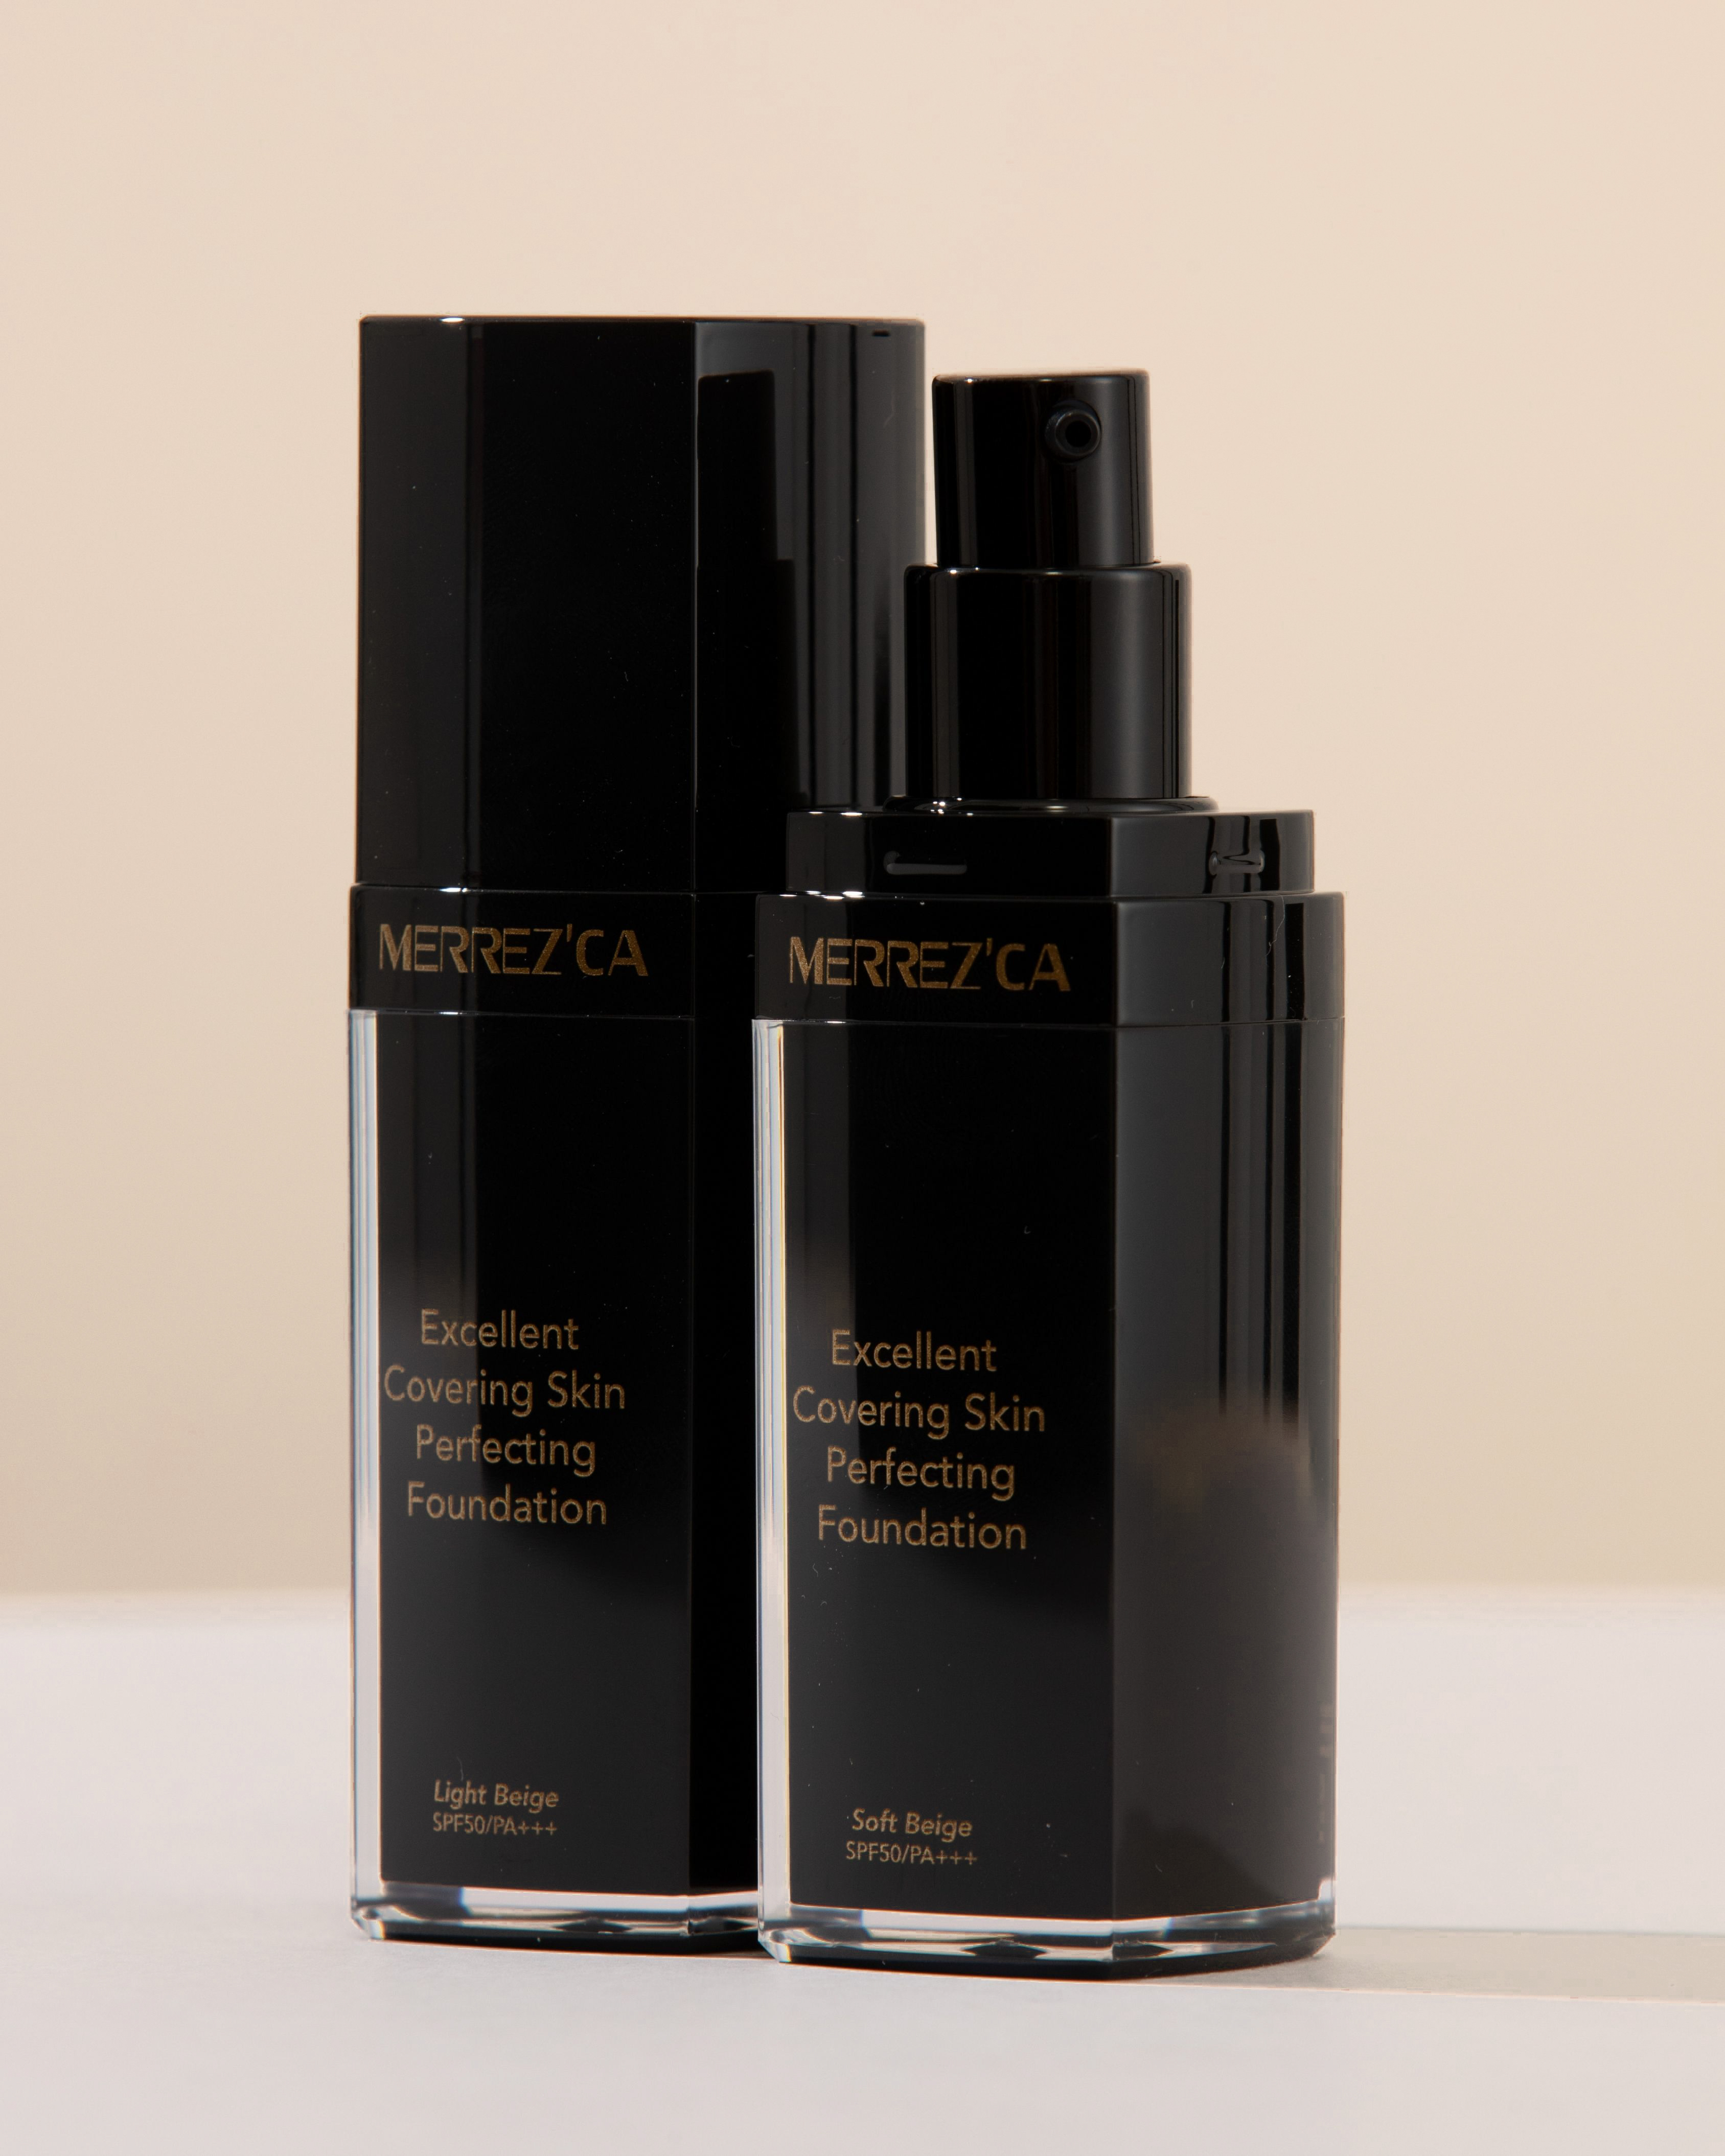 Merrezca Excellent Covering Skin Perfecting Foundation SPF50/PA+++